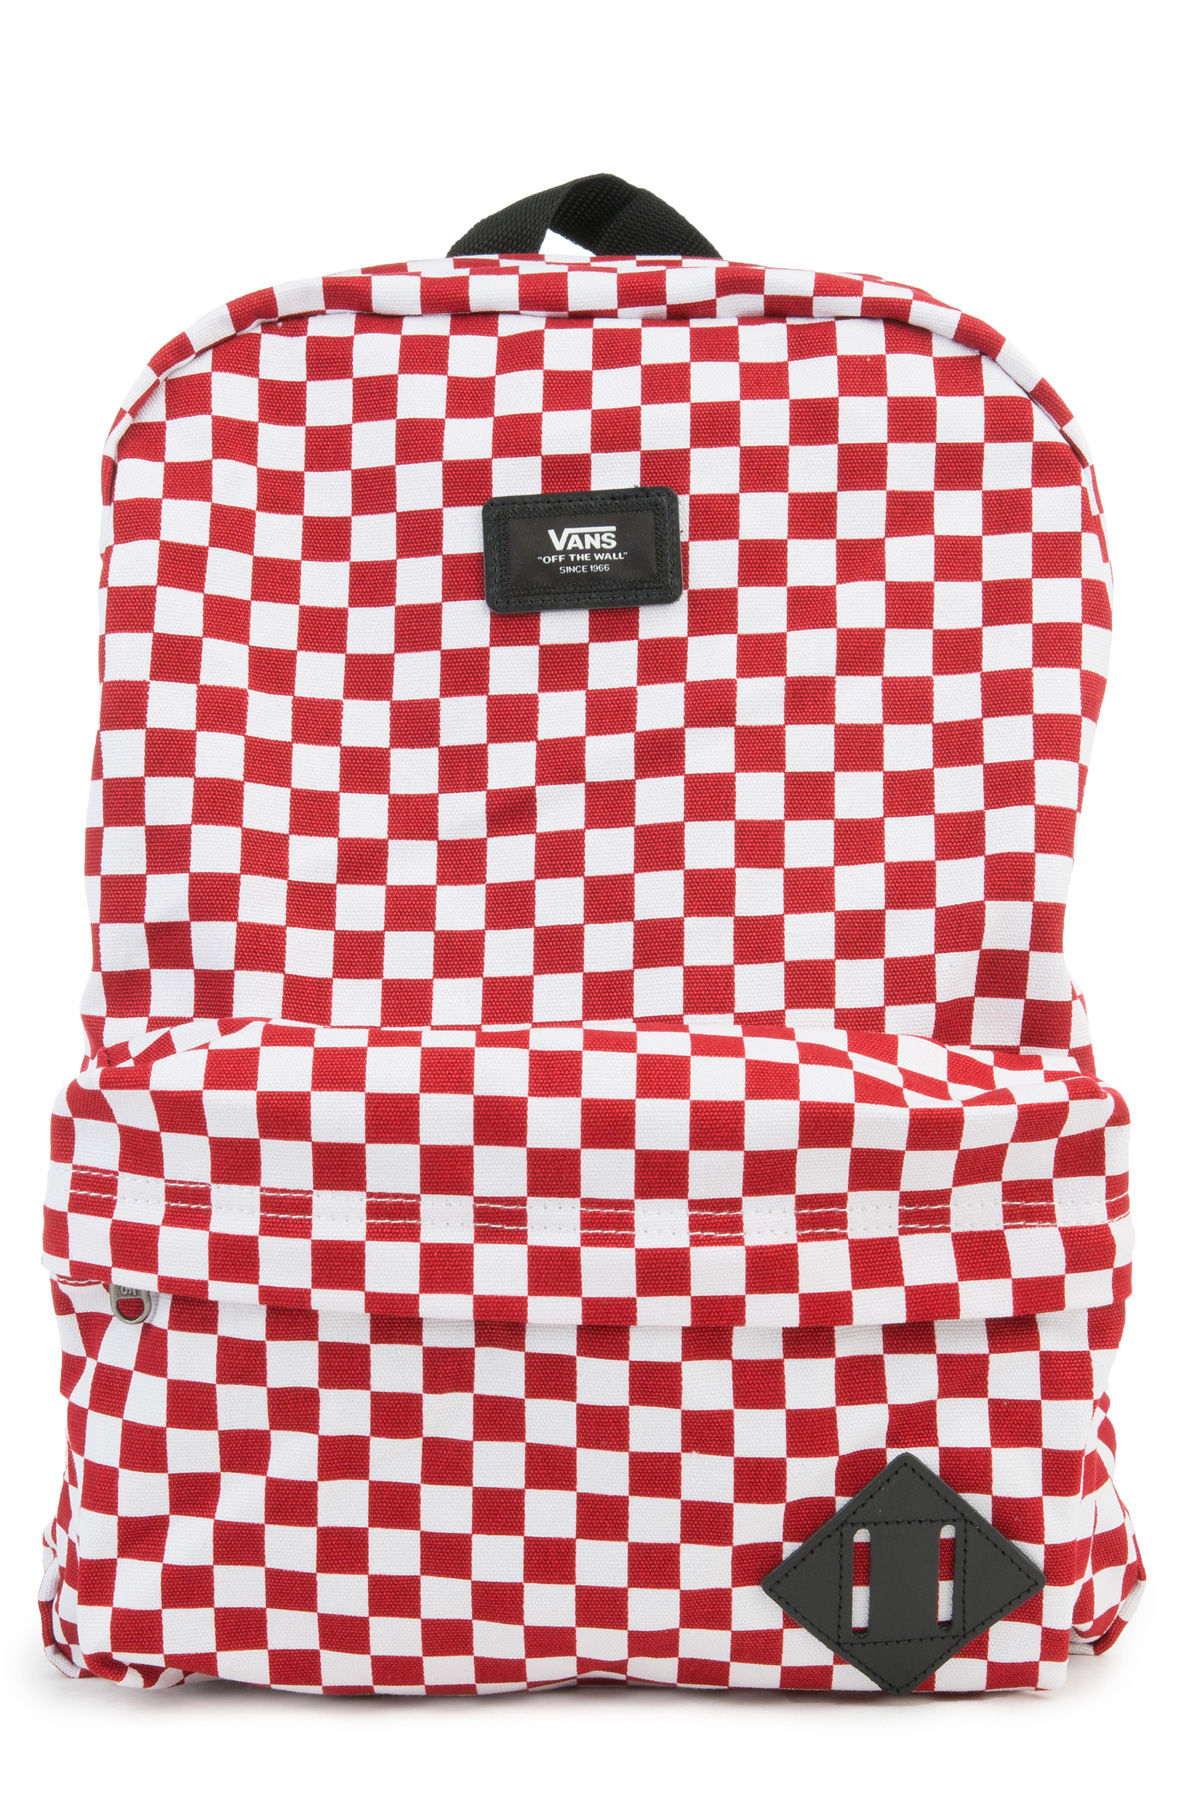 vans red and white backpack